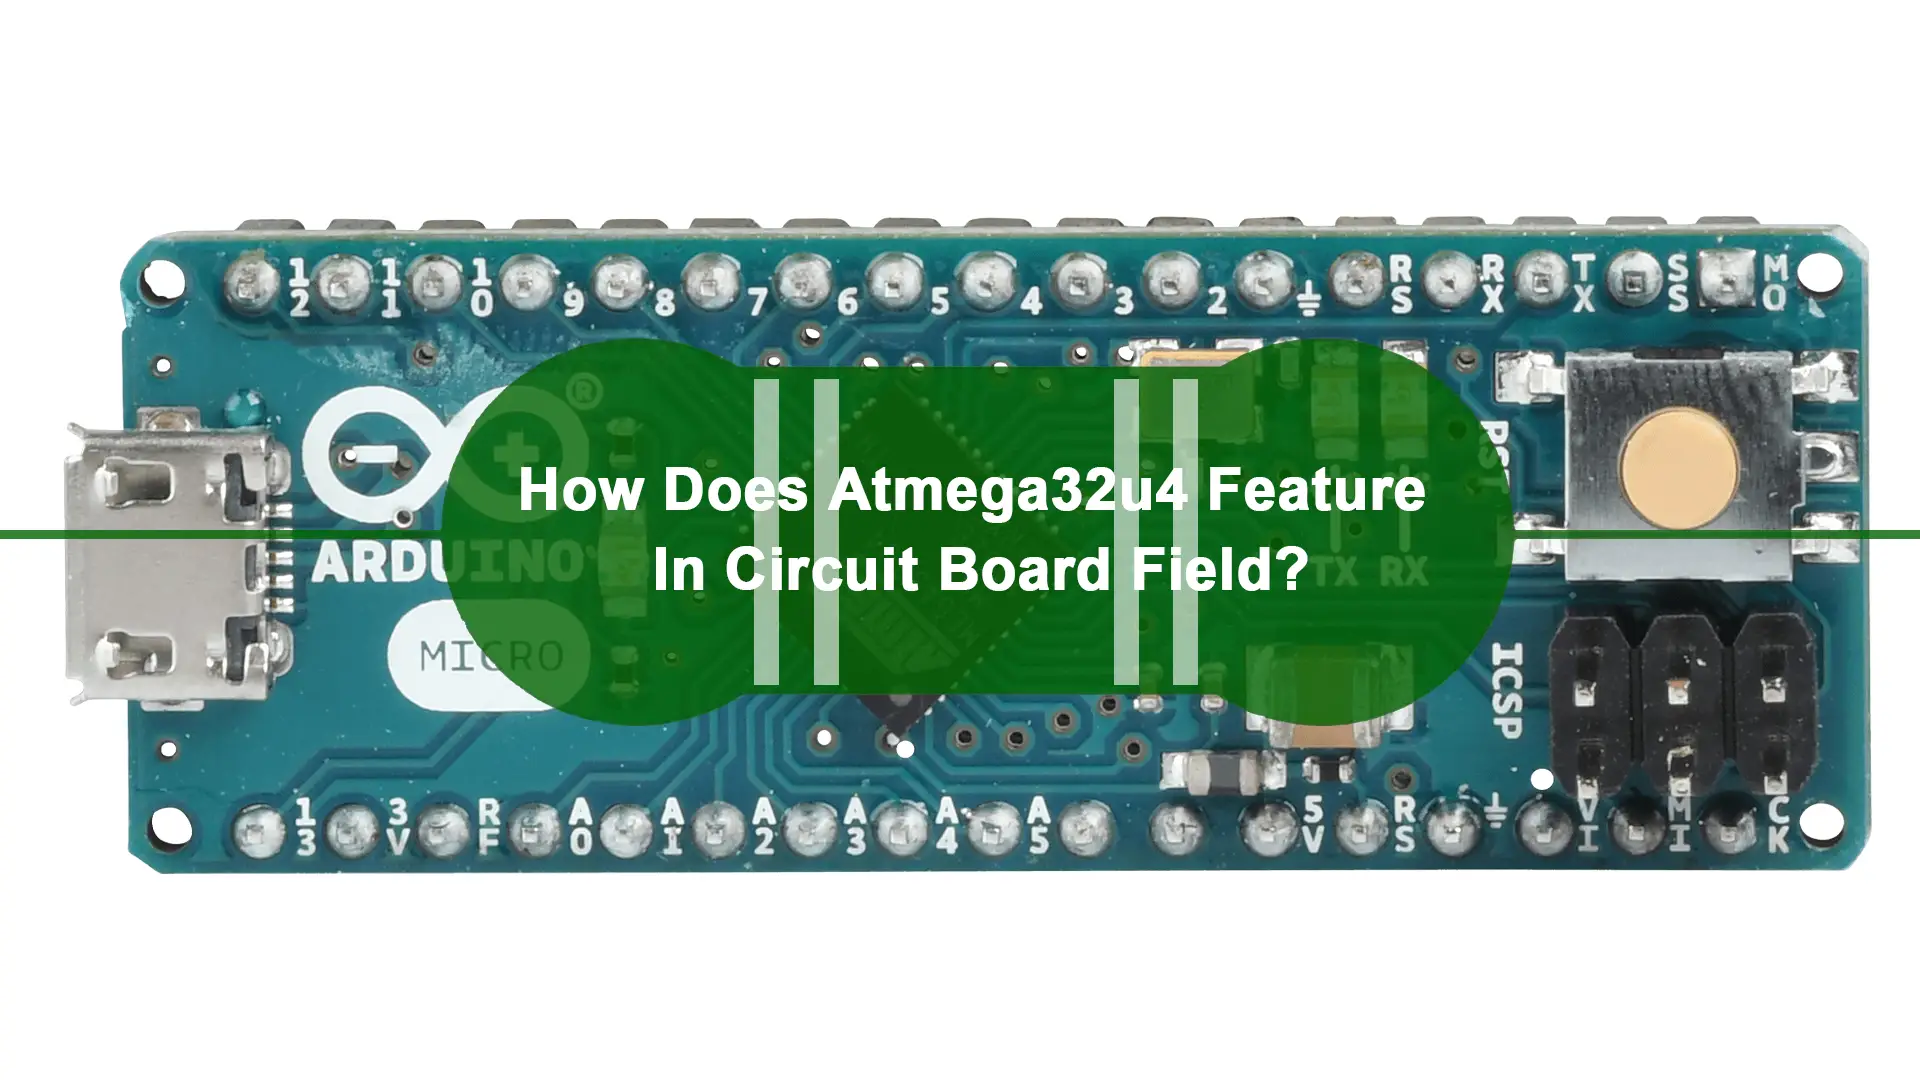 How Does Atmega32u4 Feature In Circuit Board Field